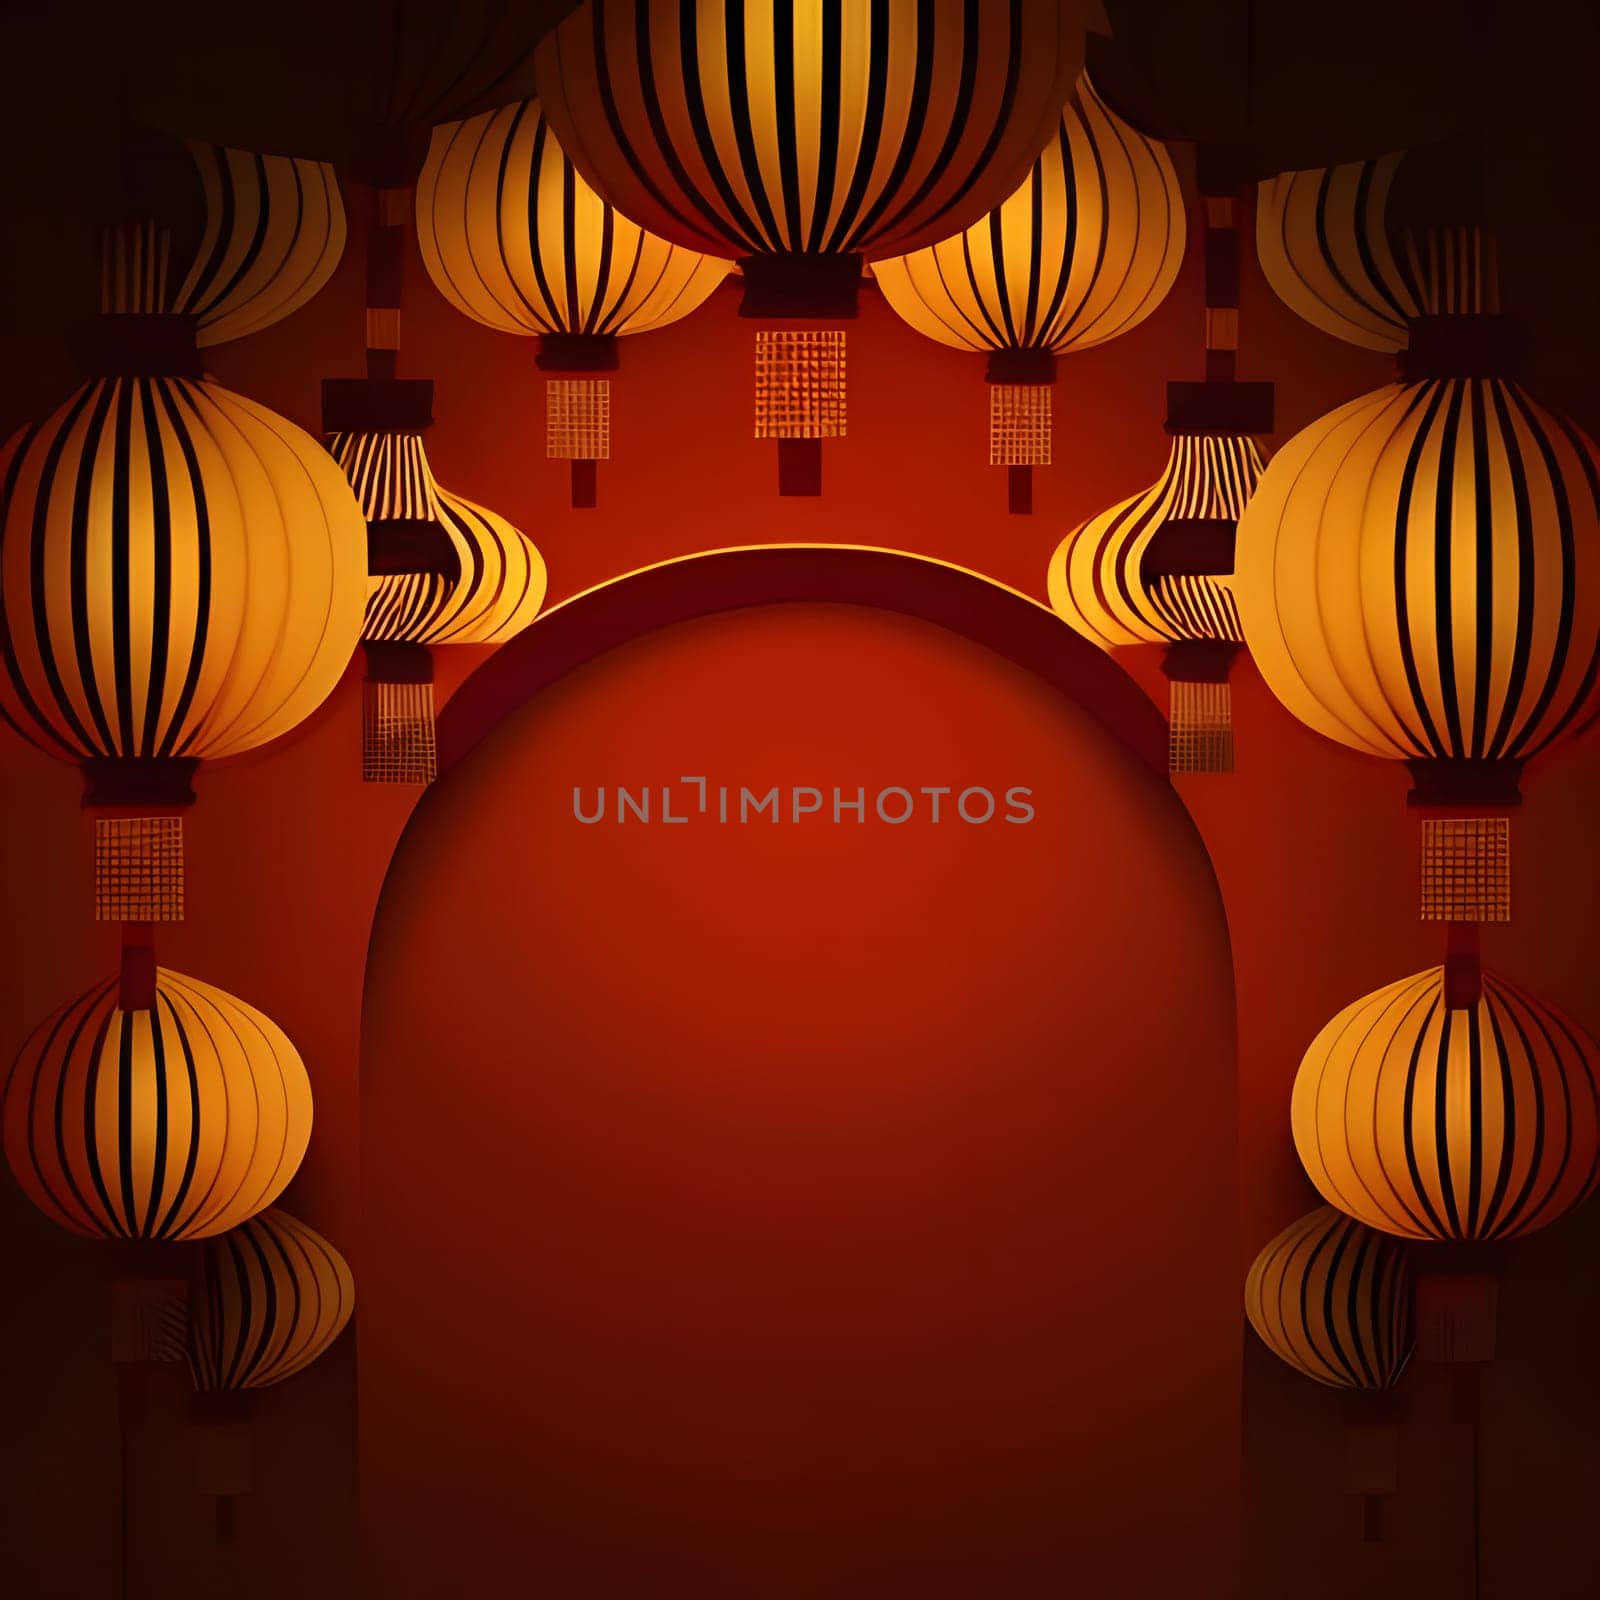 Around the Chinese lanterns in the middle, space for your own content frame. A time of celebration and resolutions.